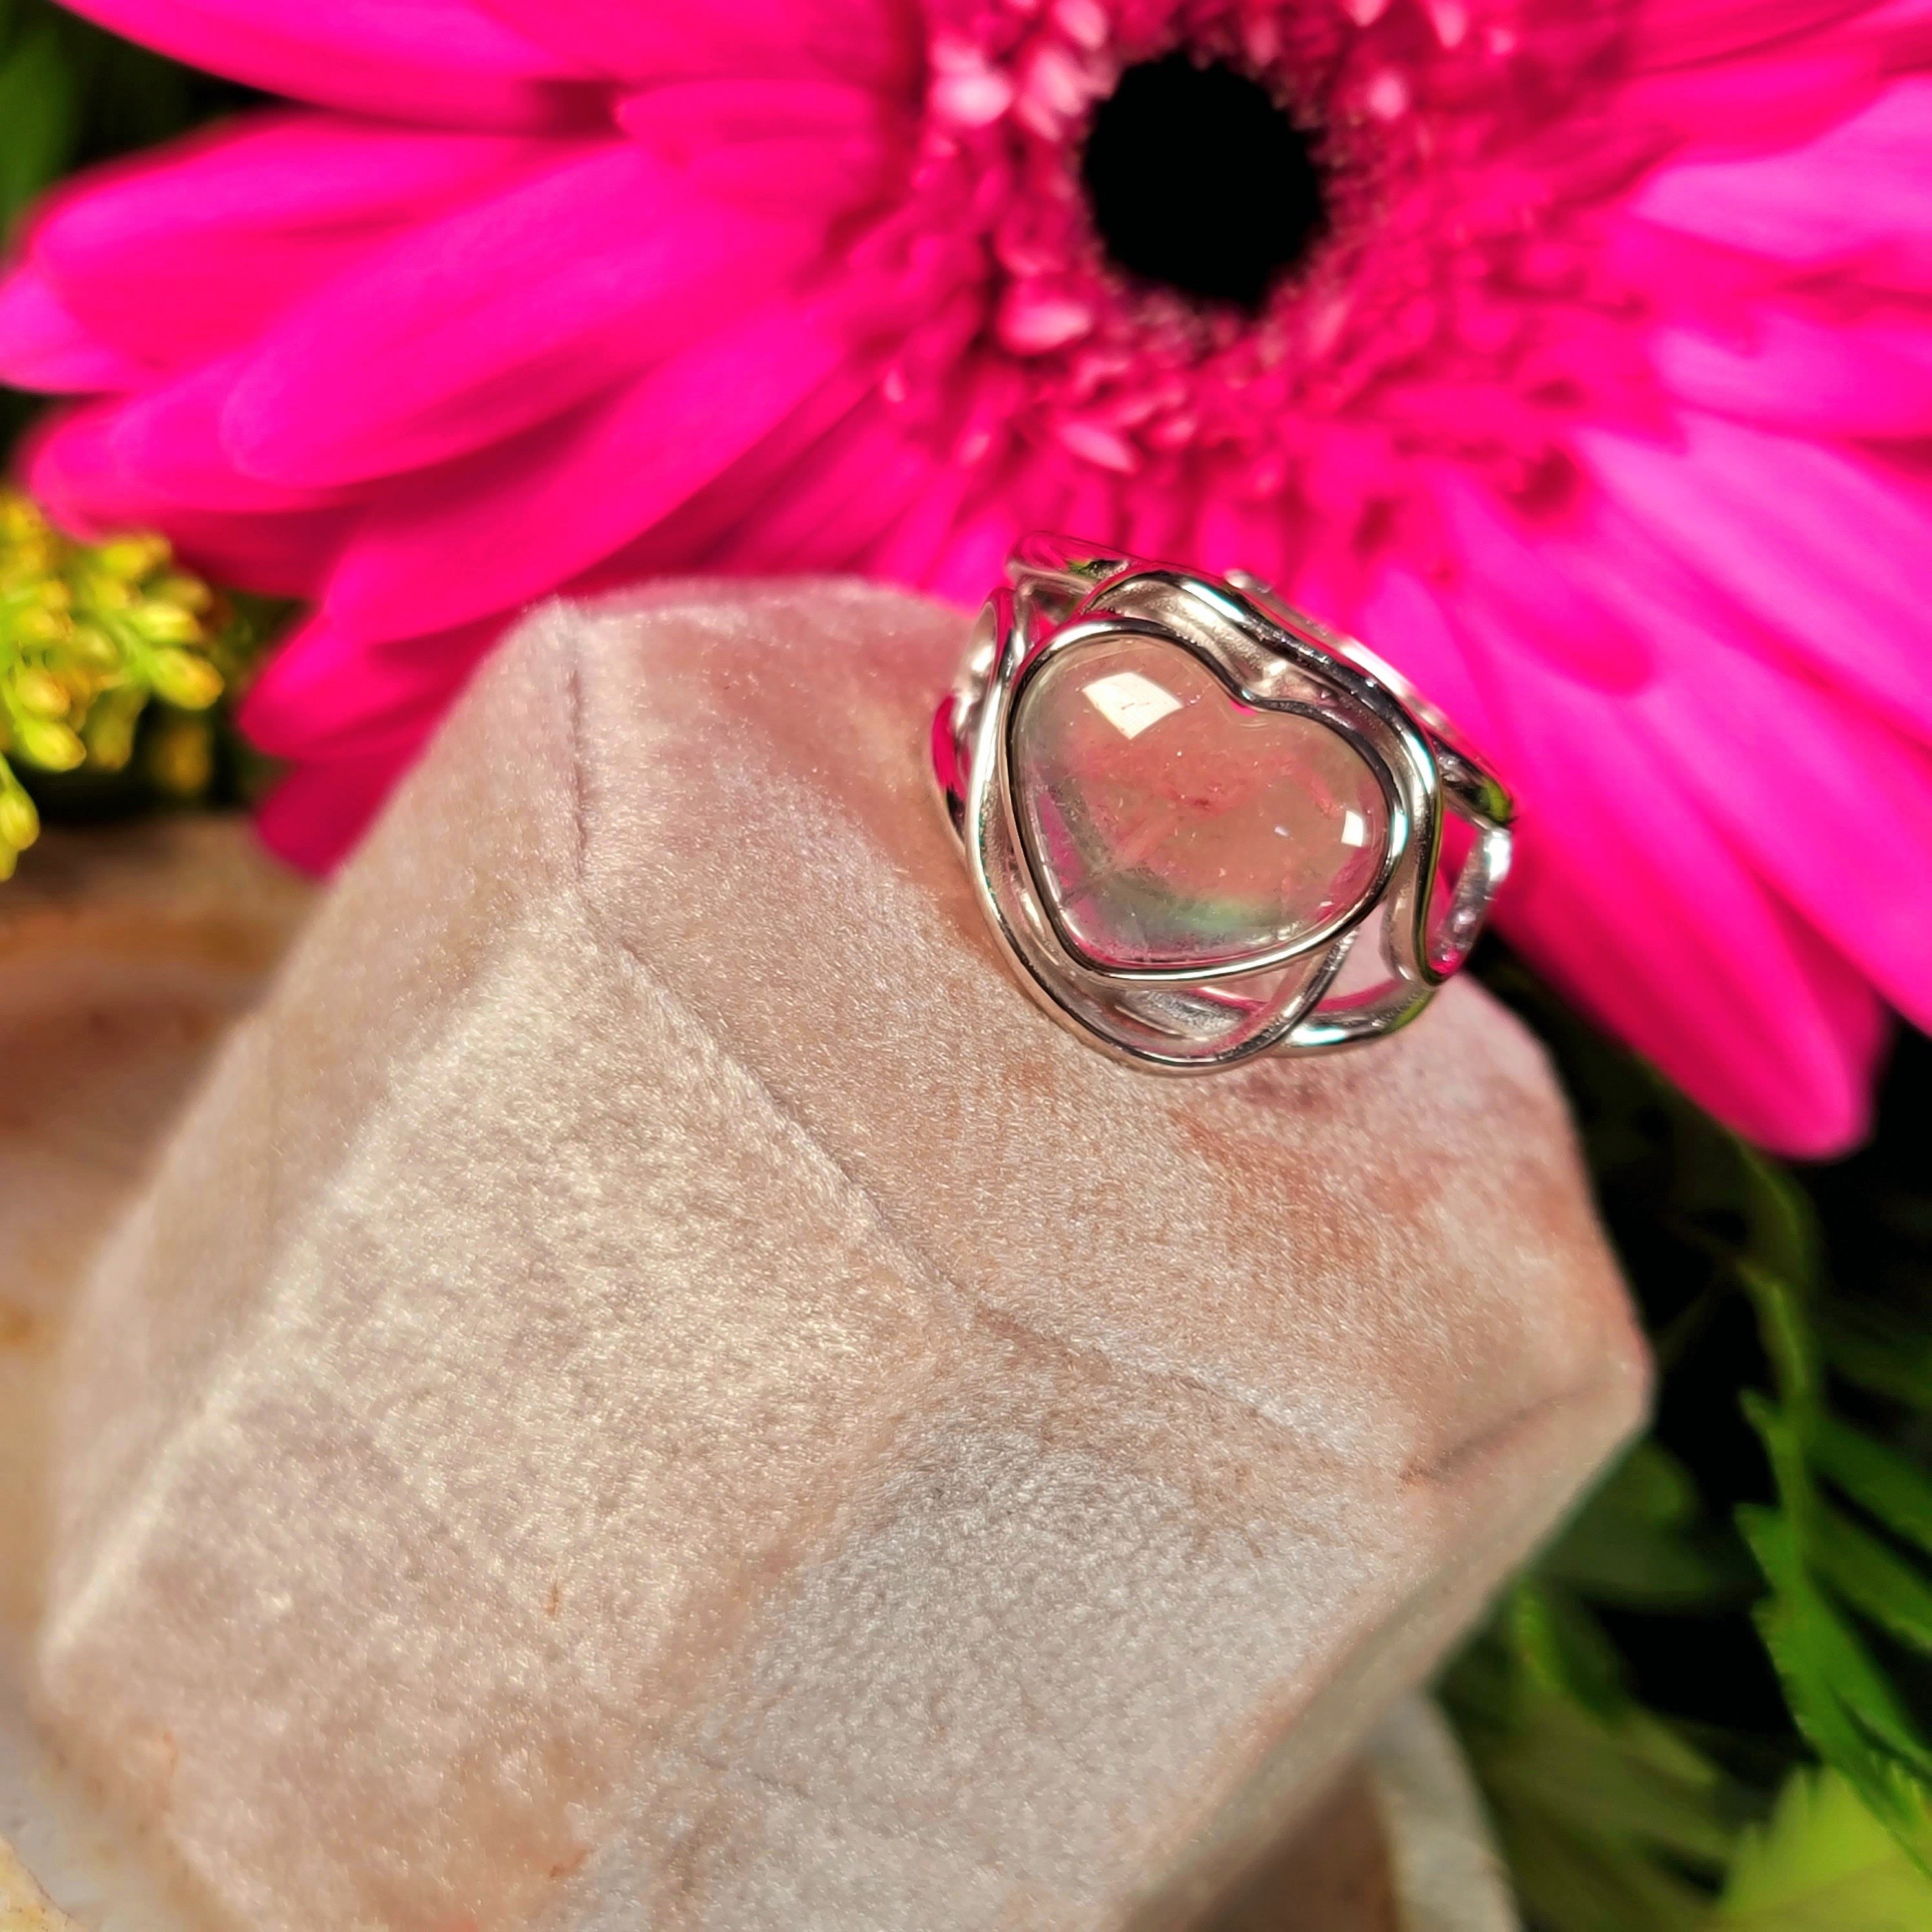 Cotton Candy Tourmaline Heart Adjustable Finger Cuff Ring .925 Silver for Improving Relationships with Compassion and Communication